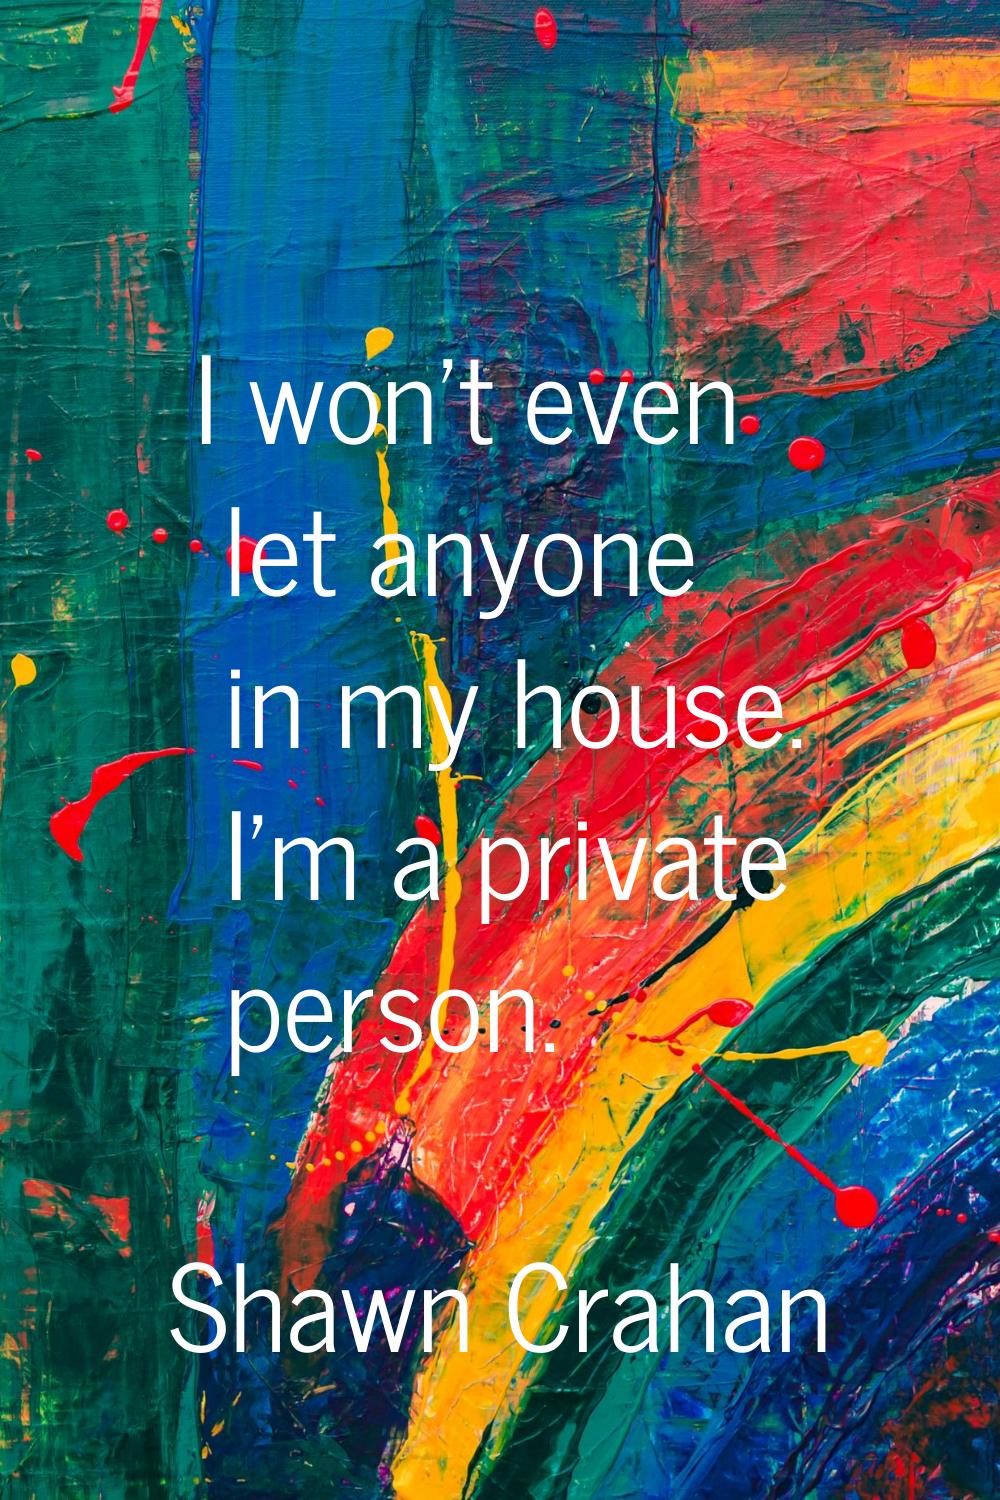 I won't even let anyone in my house. I'm a private person.